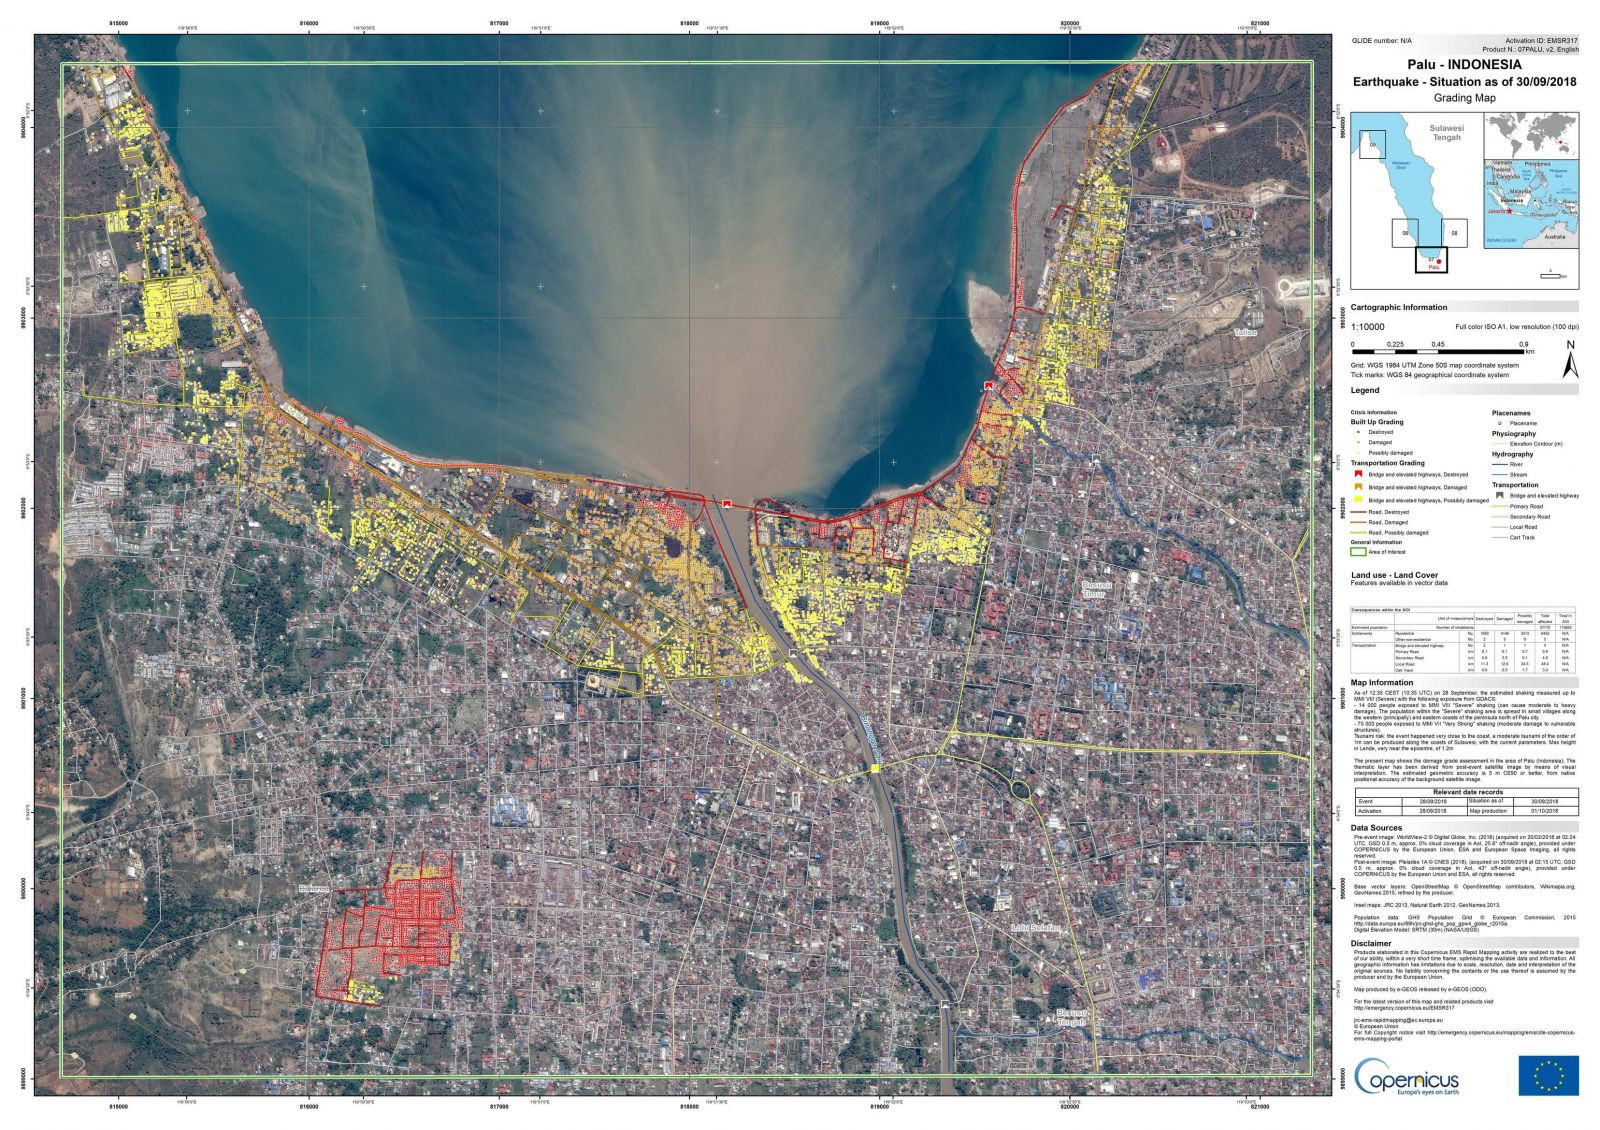 2018 October earthquake and tsunami in Indonesia: grading map of Palu city show that almost over 37,000 people, 10,000 buildings and other infrastructure were affected (Copernicus EMS © 2018 EU, [EMSR317] Palu: Grading Map)